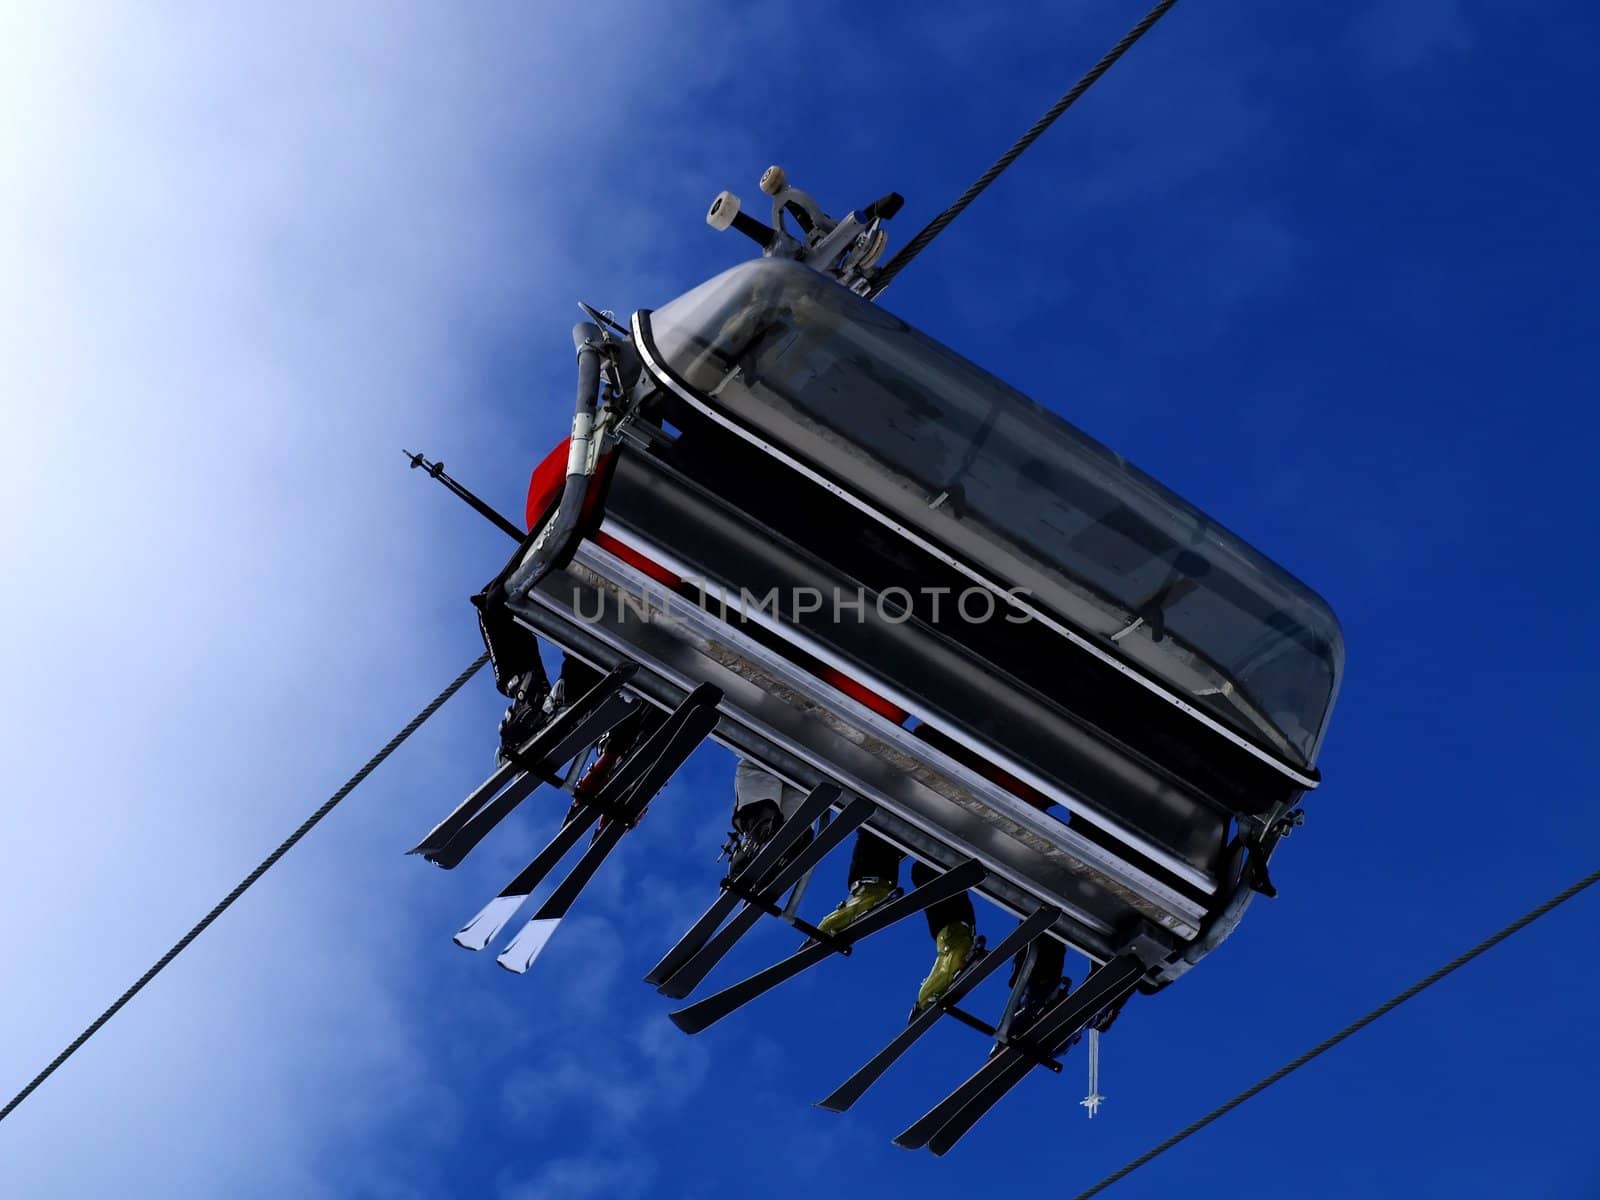 A ski lift carrying skiers.